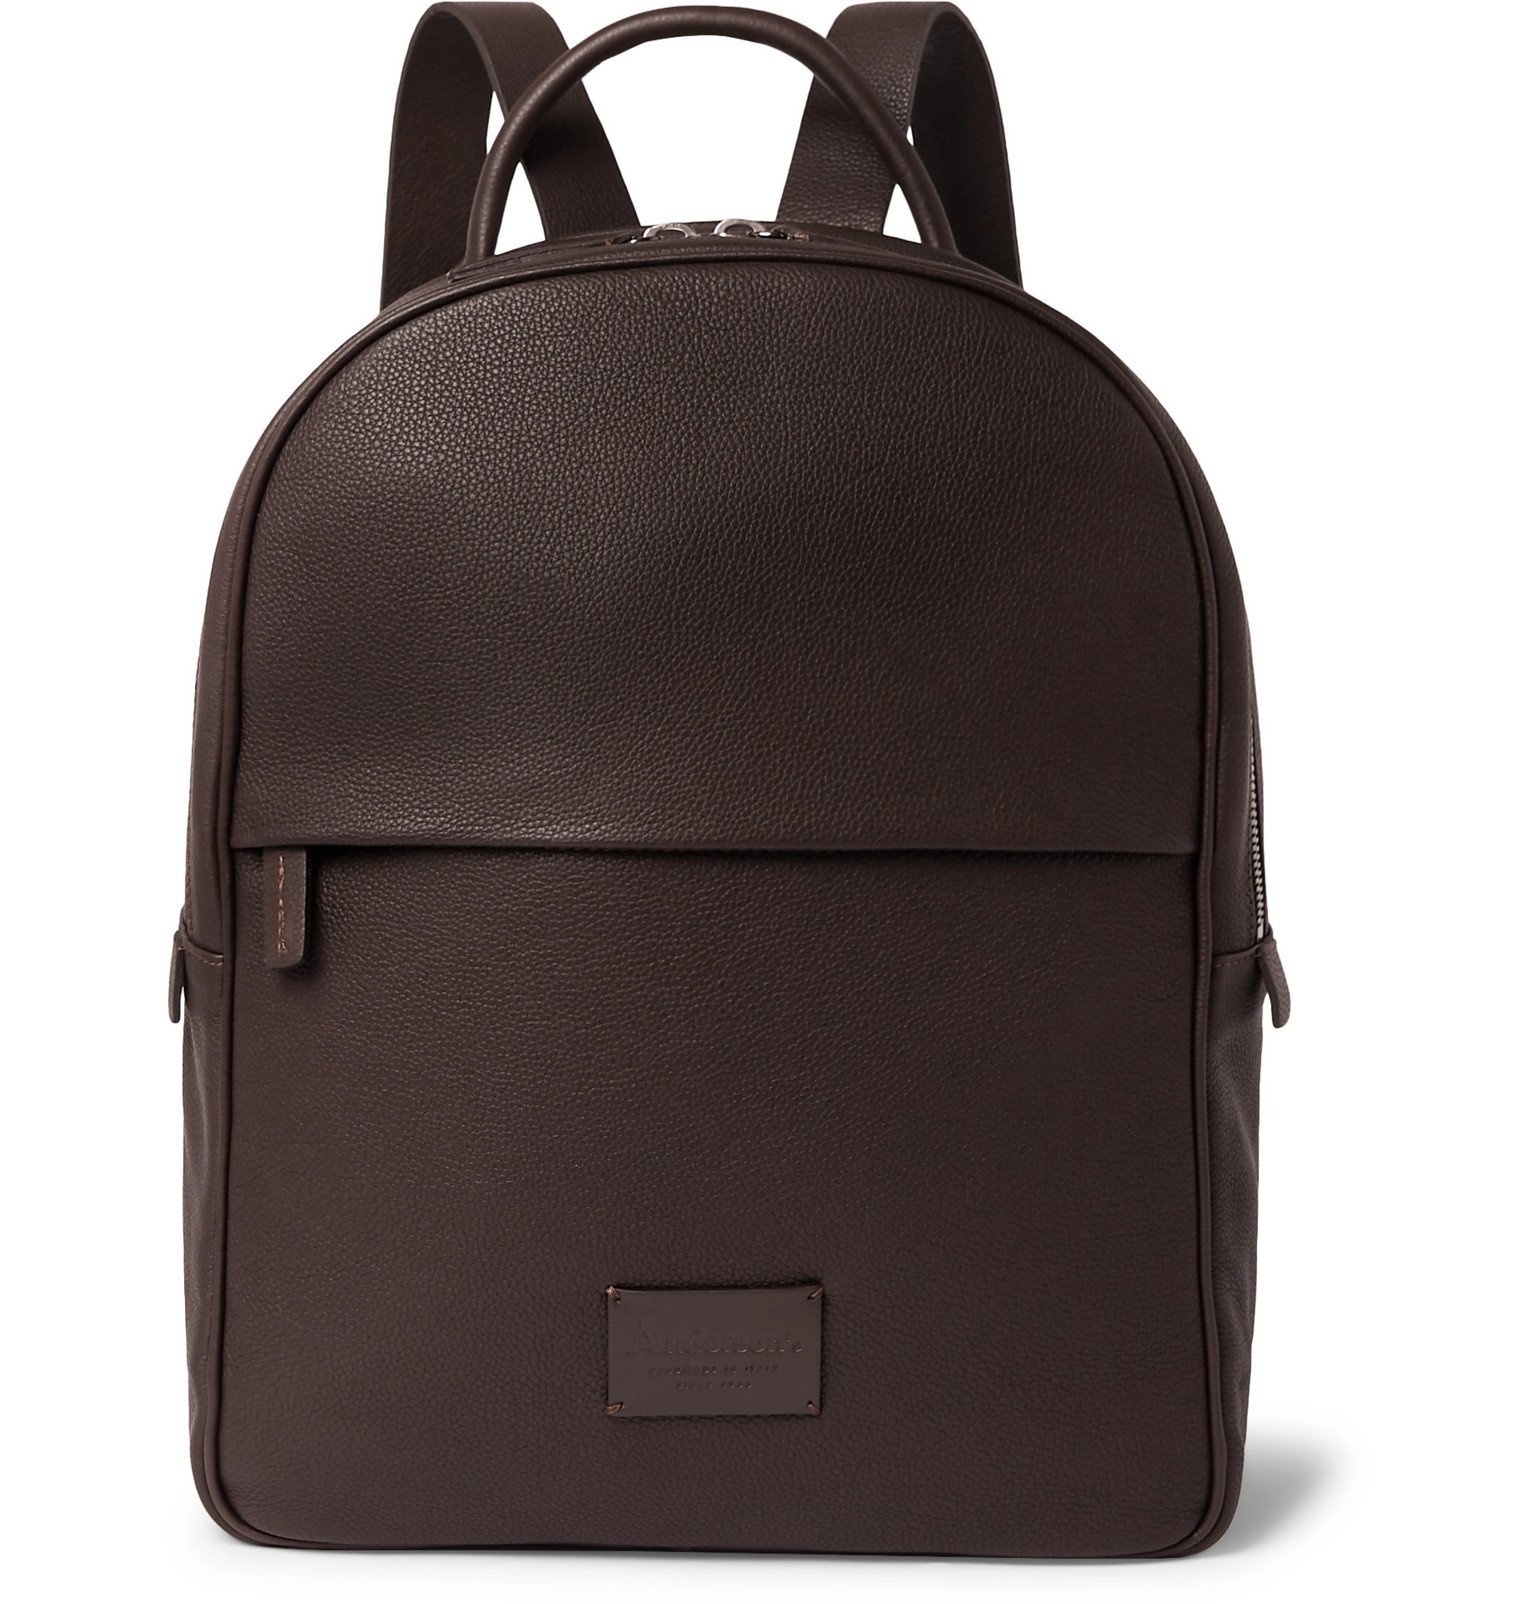 Anderson's - Full-Grain Leather Backpack - Brown Anderson's